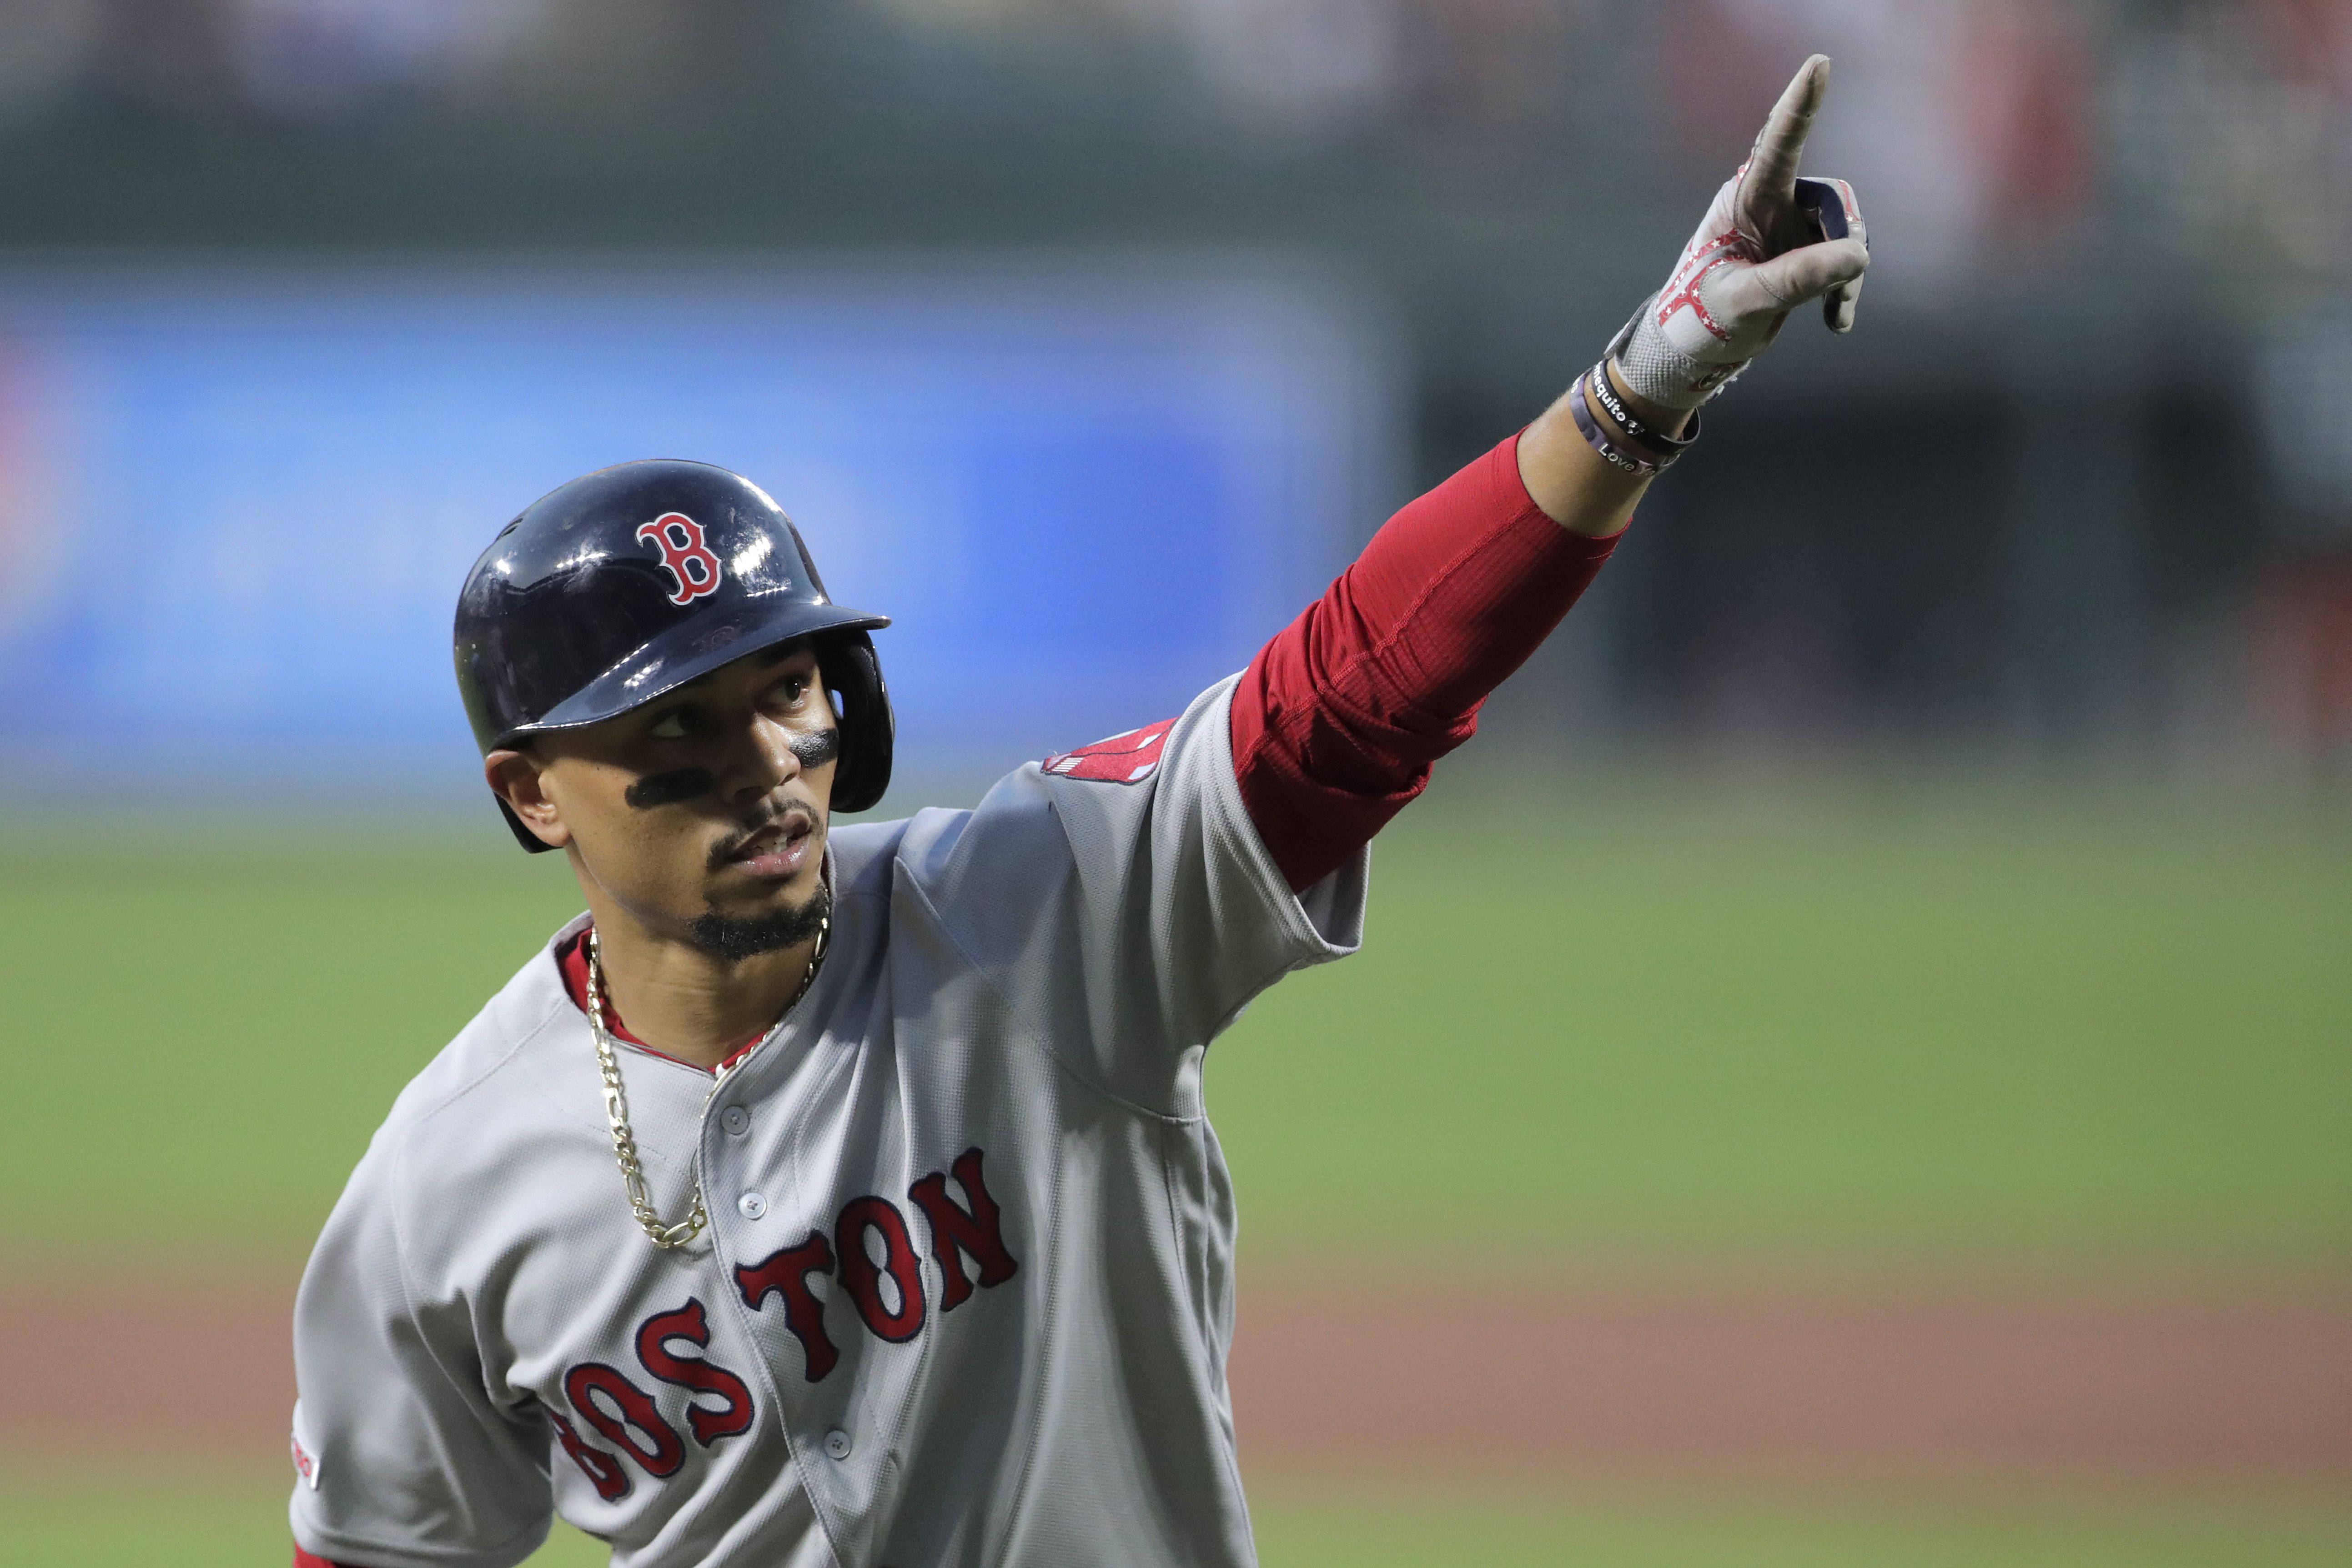 From Little League to Boston, Mookie Betts' mom has never stopped